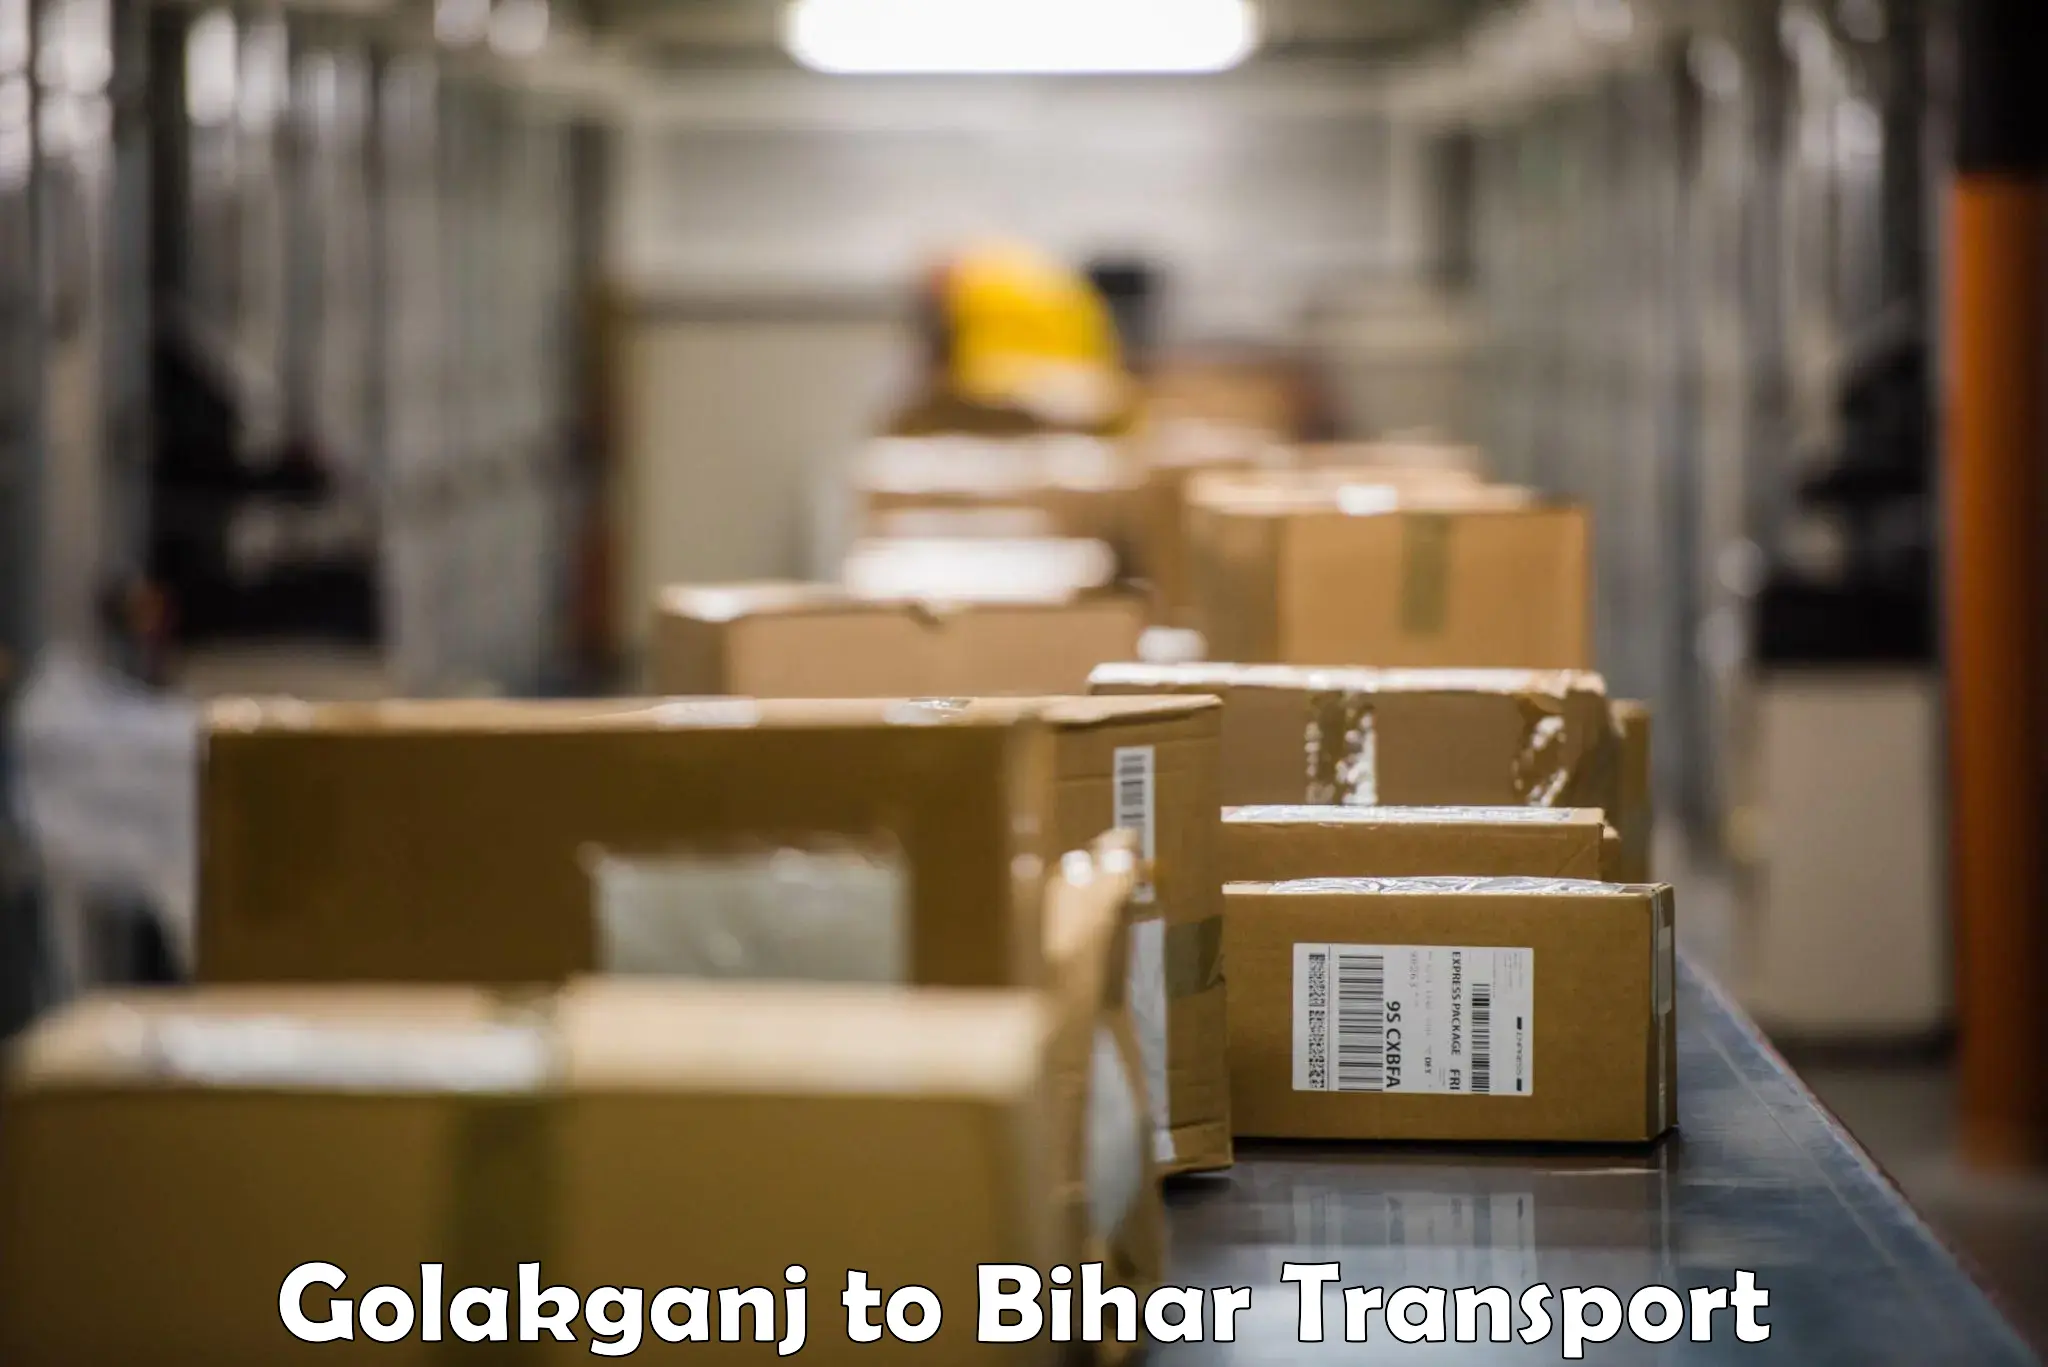 Best transport services in India Golakganj to Dhaka